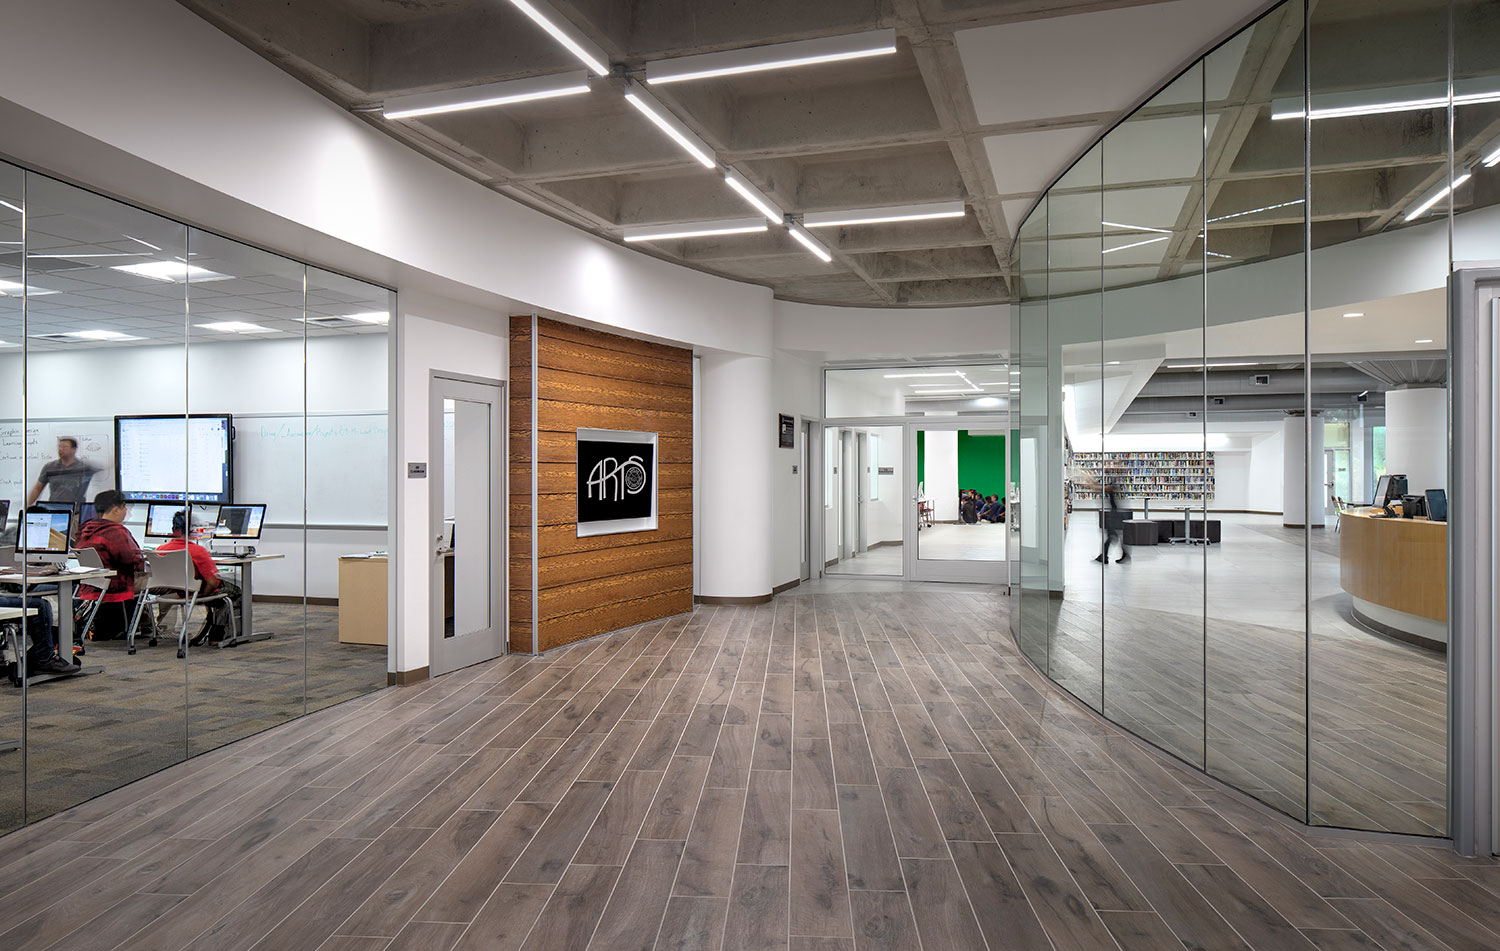 waffle slab ceiling with orthogonal lighting and wooden floor in a hallway lined with glass walled media labs and classrooms